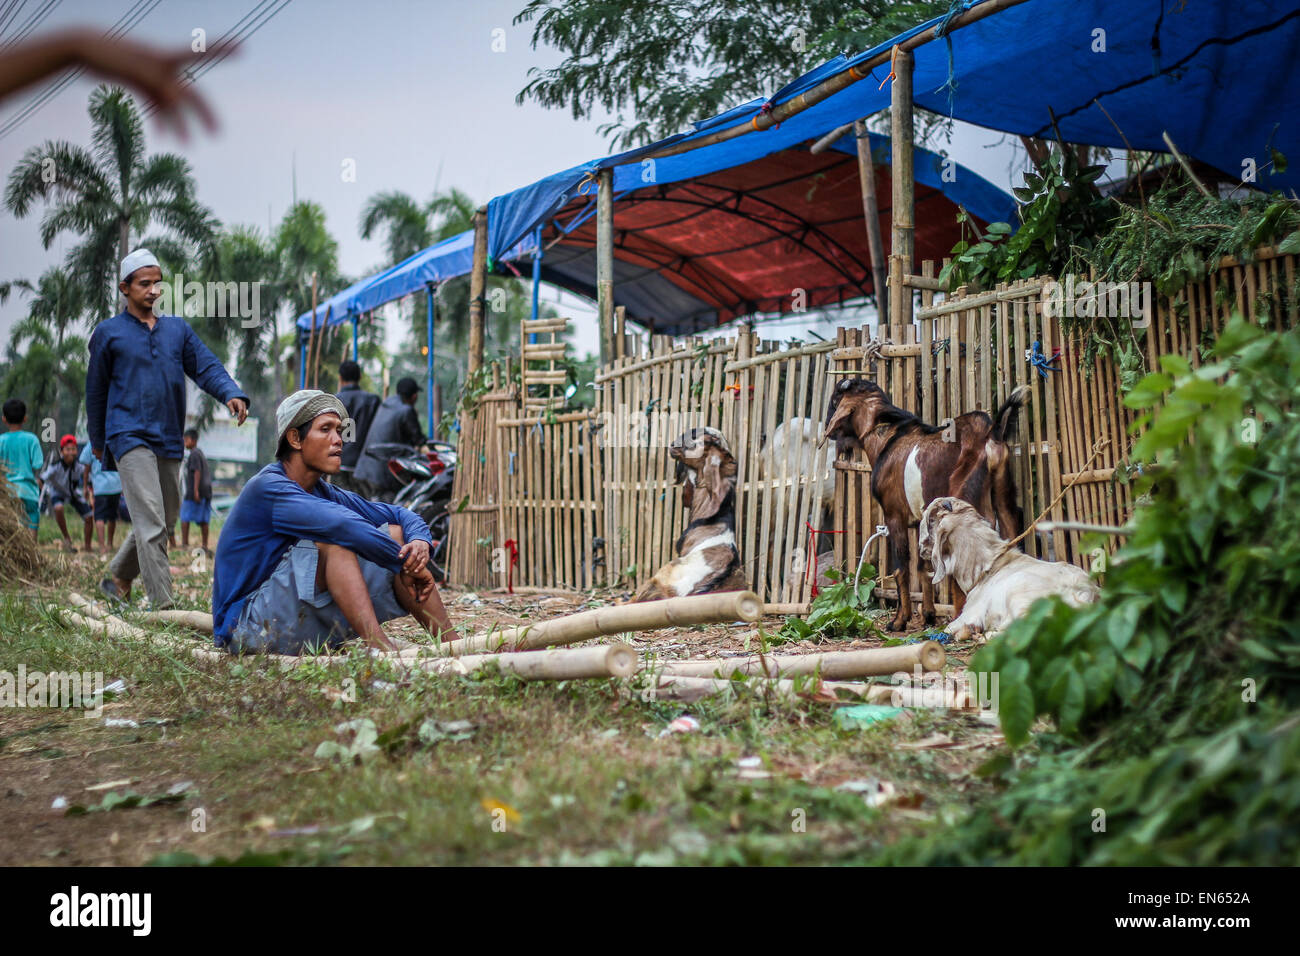 Tangerang, Indonesia. 28th Sep, 2014. A goat vendor waits for customers as goats are offered for sale for Eid al-Adha near to the Asmaul Husna Masjid. Eid al-Adha, also known as the Feast of Sacrifice, commemorates prophet Abraham's willingness to sacrifice his son as an act of obedience to God, who in accordance with tradition then provided a lamb in the boy's place. © Garry Andrew Lotulung/Pacific Press/Alamy Live News Stock Photo